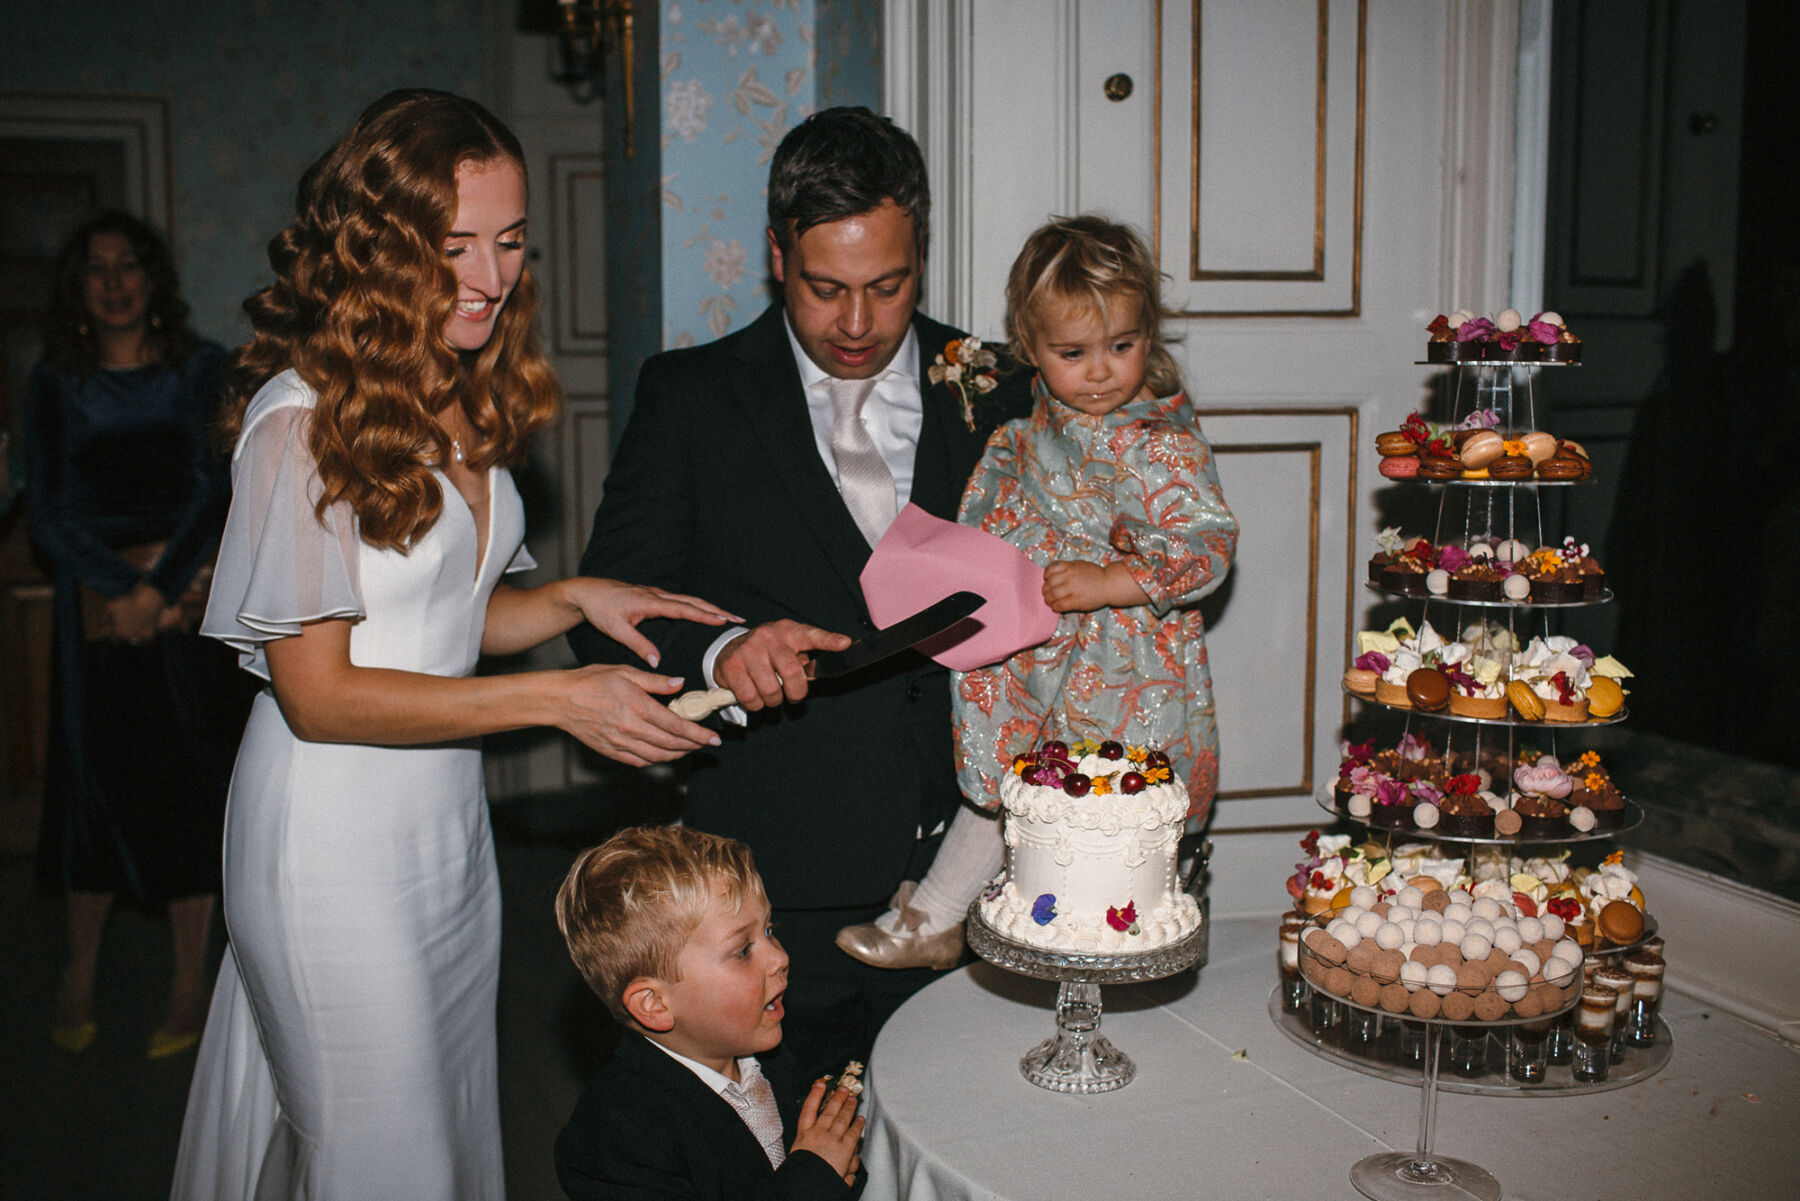 Bride and groom and their young children prepare to cut the cake, alongside a tower of sweet treats.